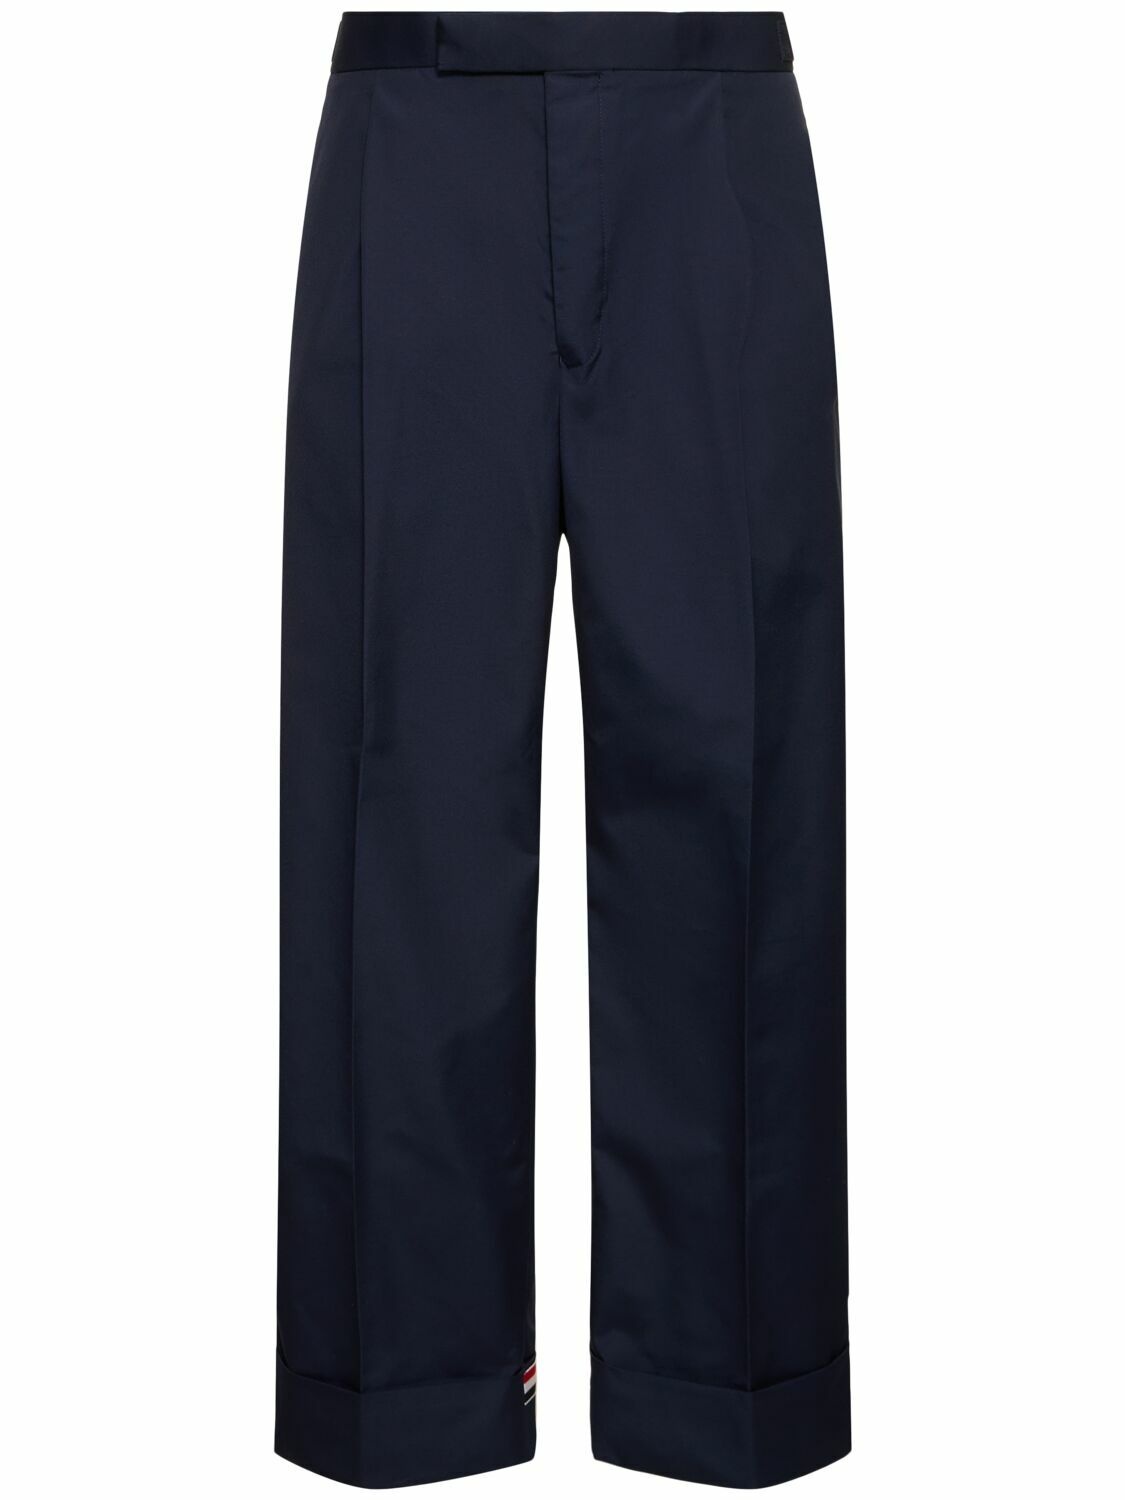 Photo: THOM BROWNE Cotton Blend Pants with Gg Cuff